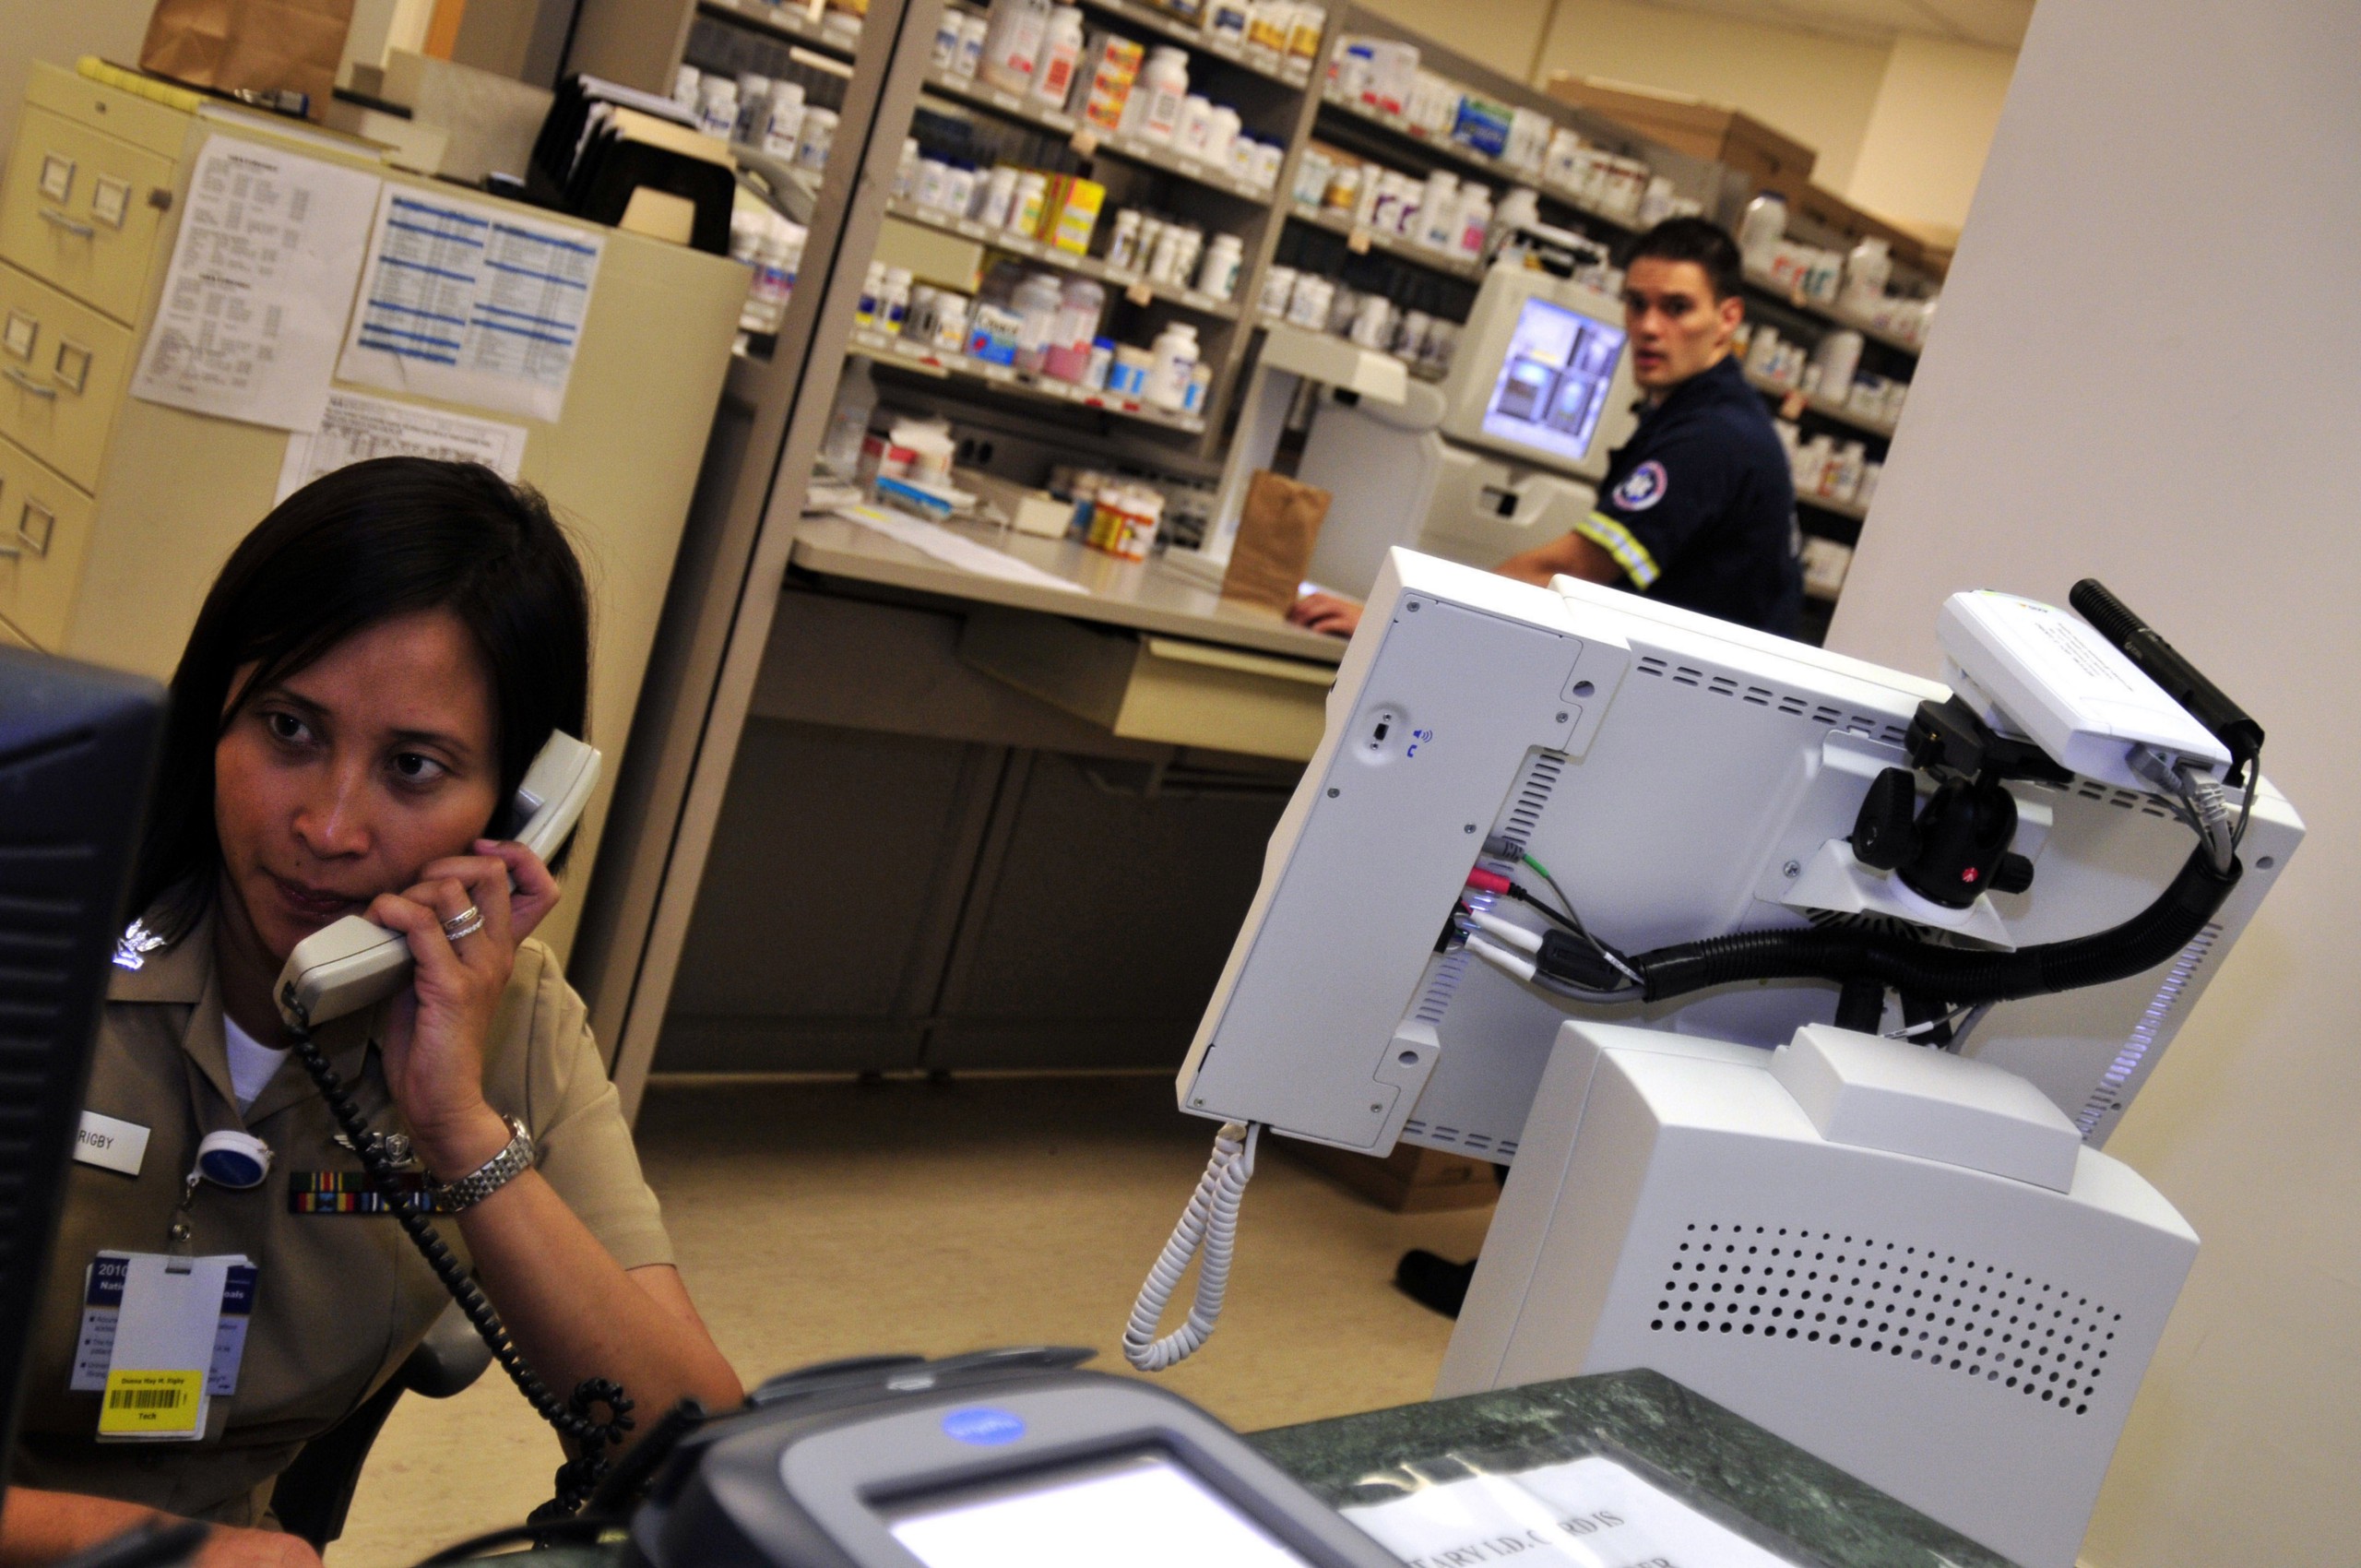 A woman speaks on the phone in a pharmacy while a man in EMT uniform looks on.